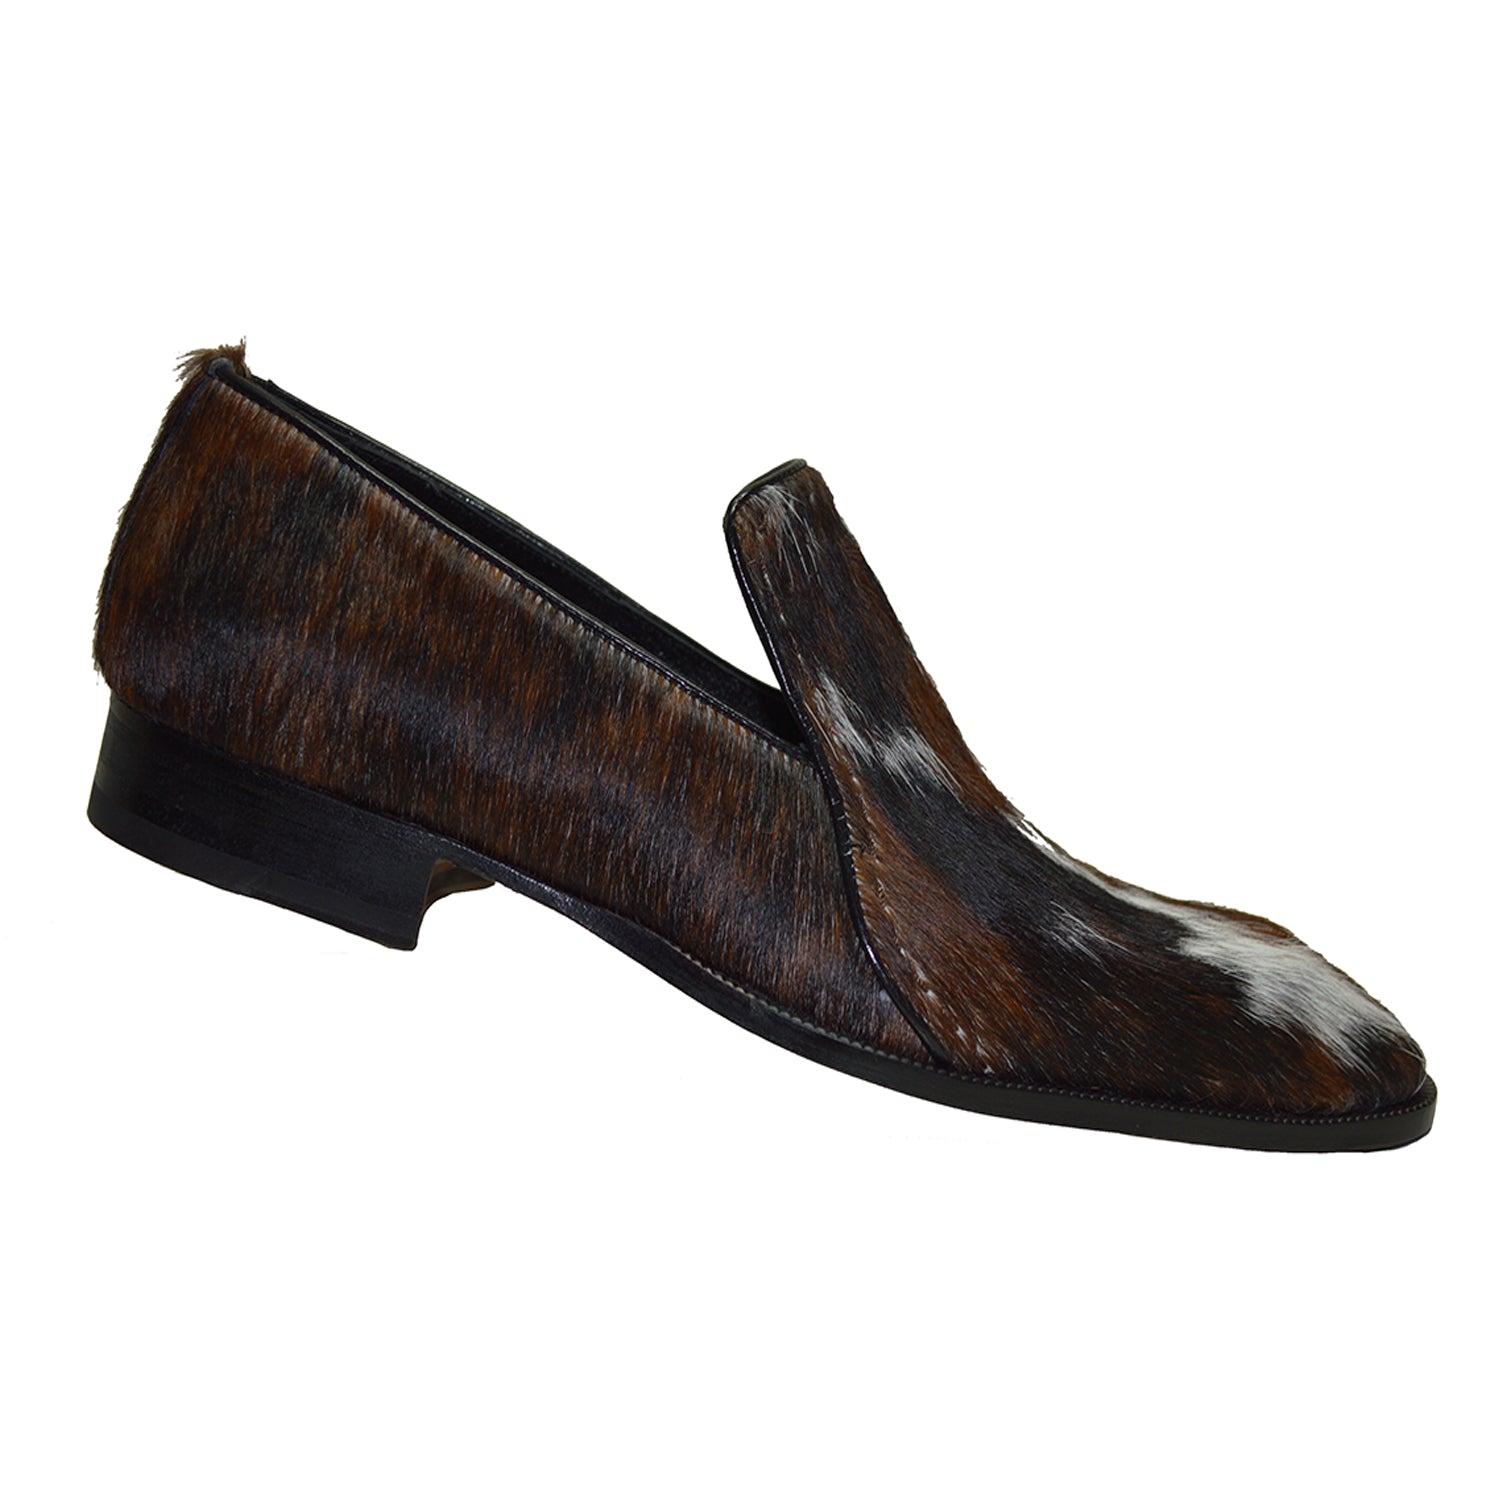 Sheriff Collection x Mauri 4924 Brown Pony Loafer